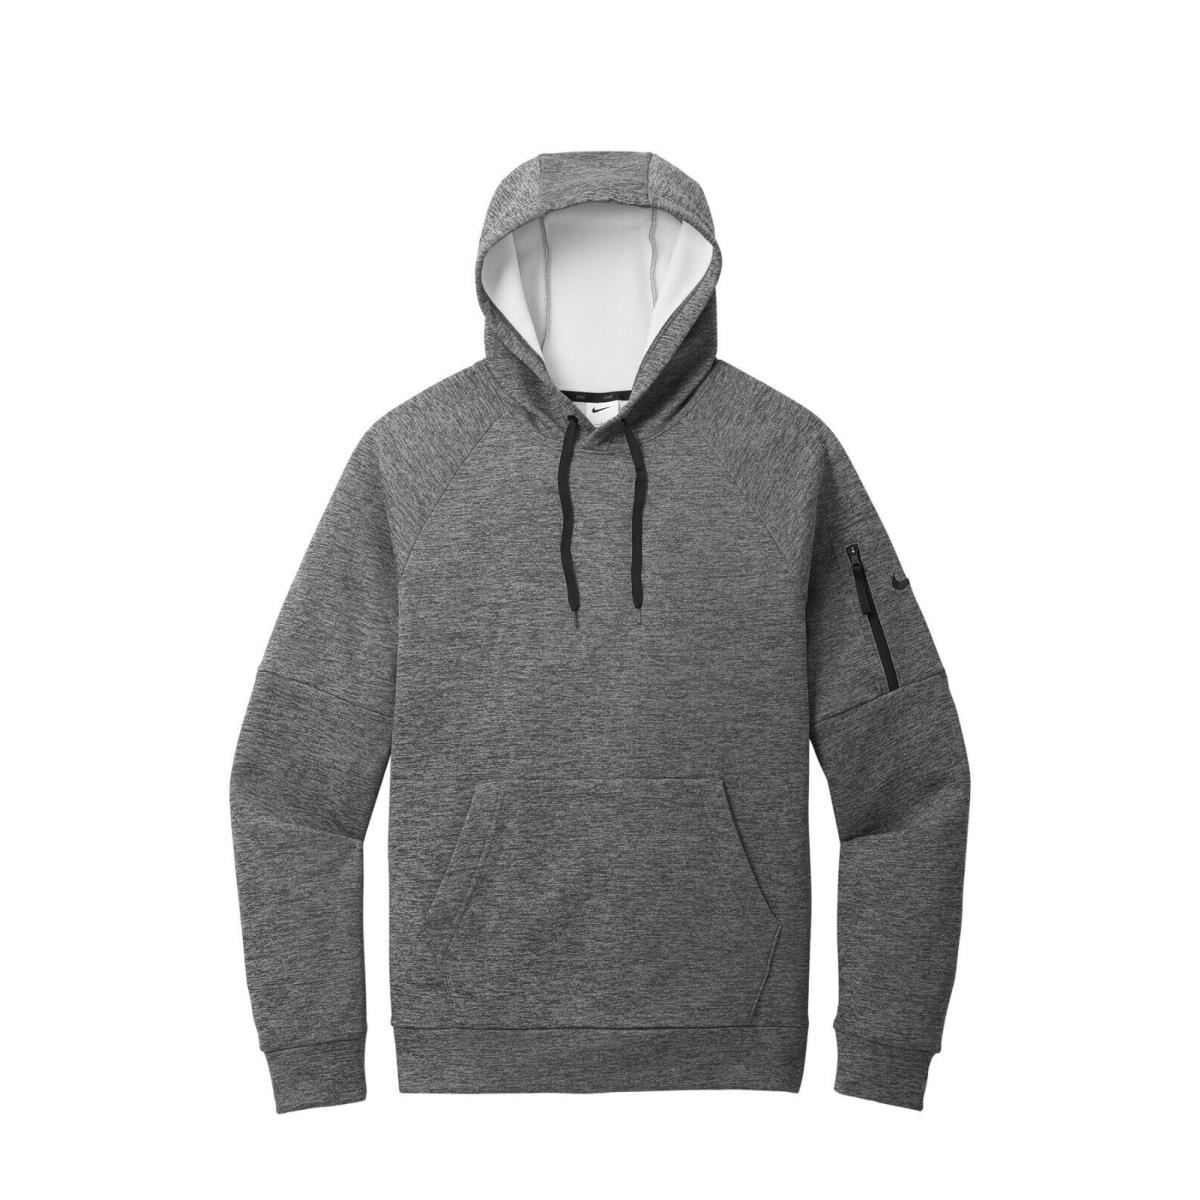 Nike Men`s Therma-fit Fleece Pullover Hoodie Drawcord Hood Arm Pocket XS-4XL Charcoal Heather Grey